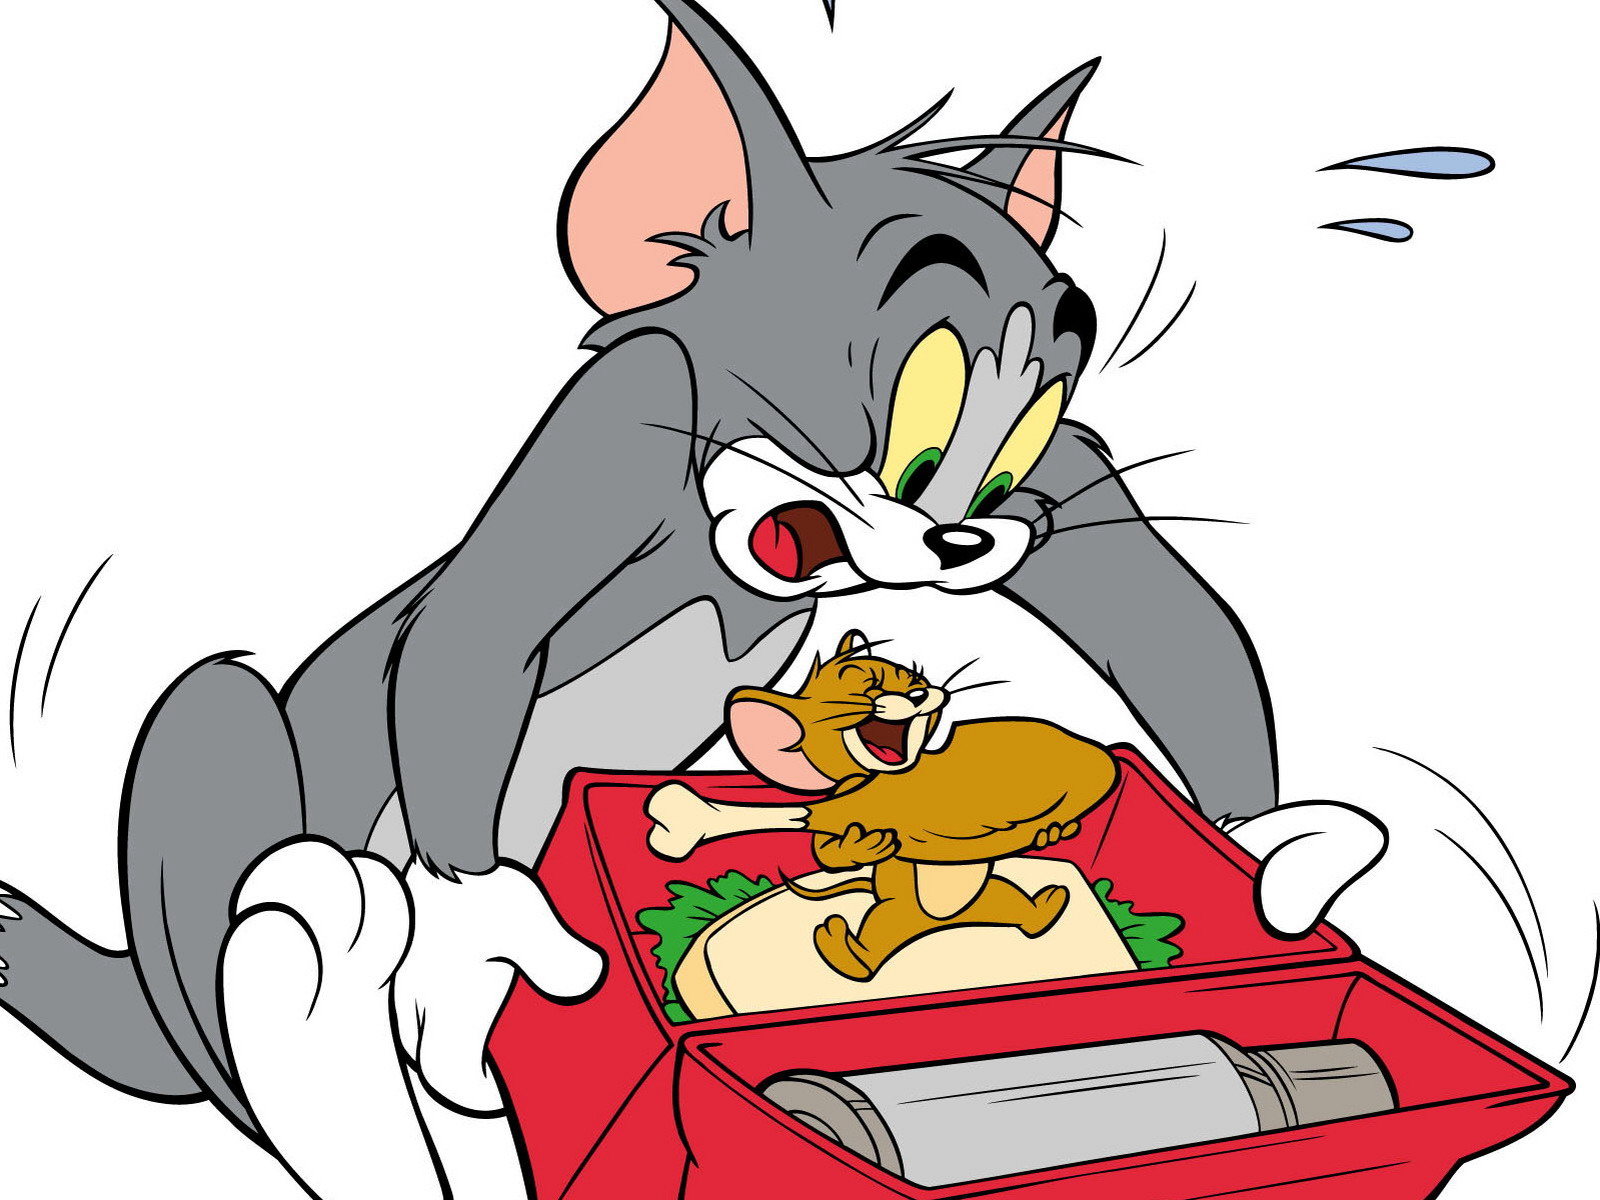 Tom and jerry 55. Tom and Jerry. Том и Джерри том. Том и Джерри Джерри.